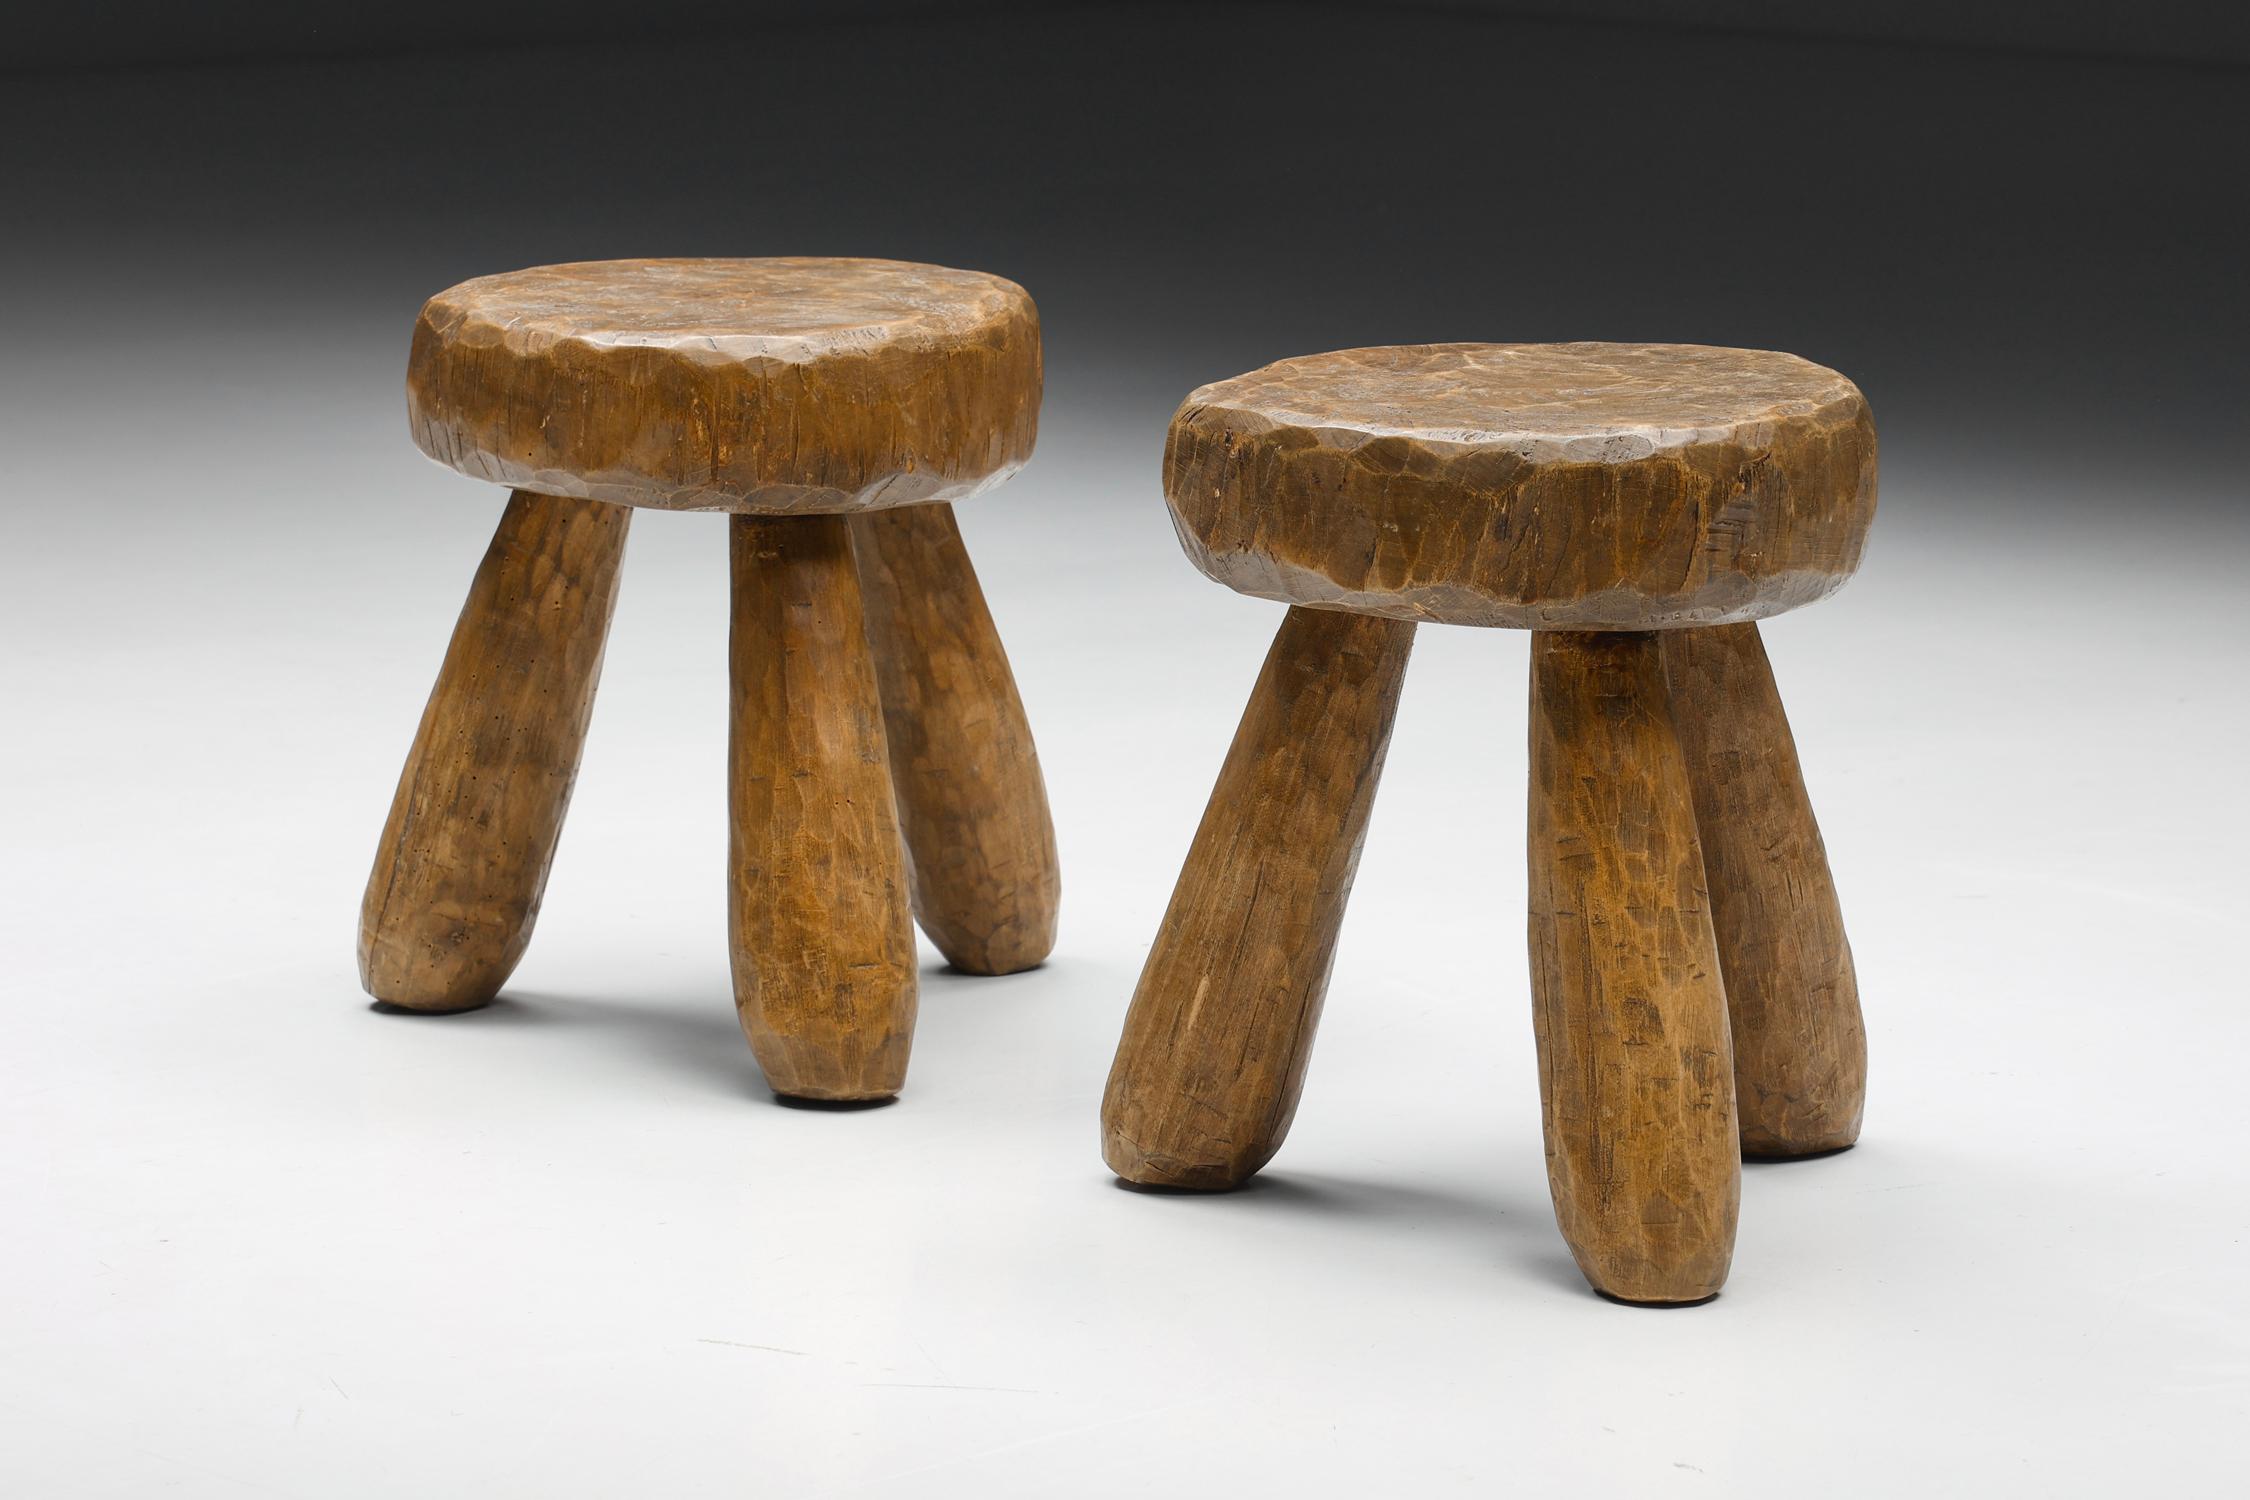 French Rustic Wabi-Sabi Round Wooden Stools, France, 1950's